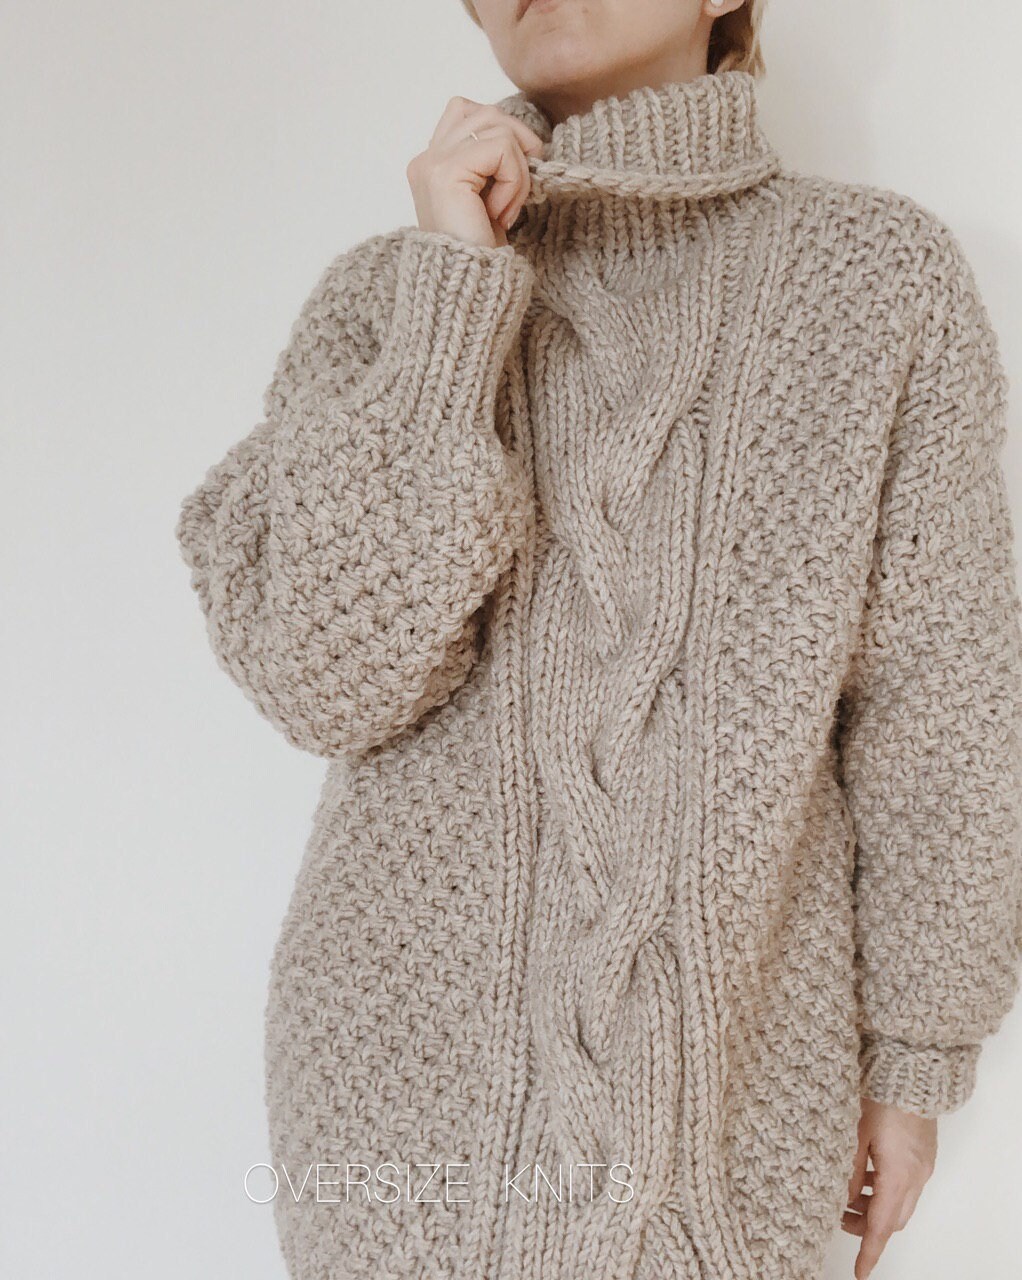 Oversized Sweater Chunky Knit Cardigan Cable Knit Sweater - Etsy